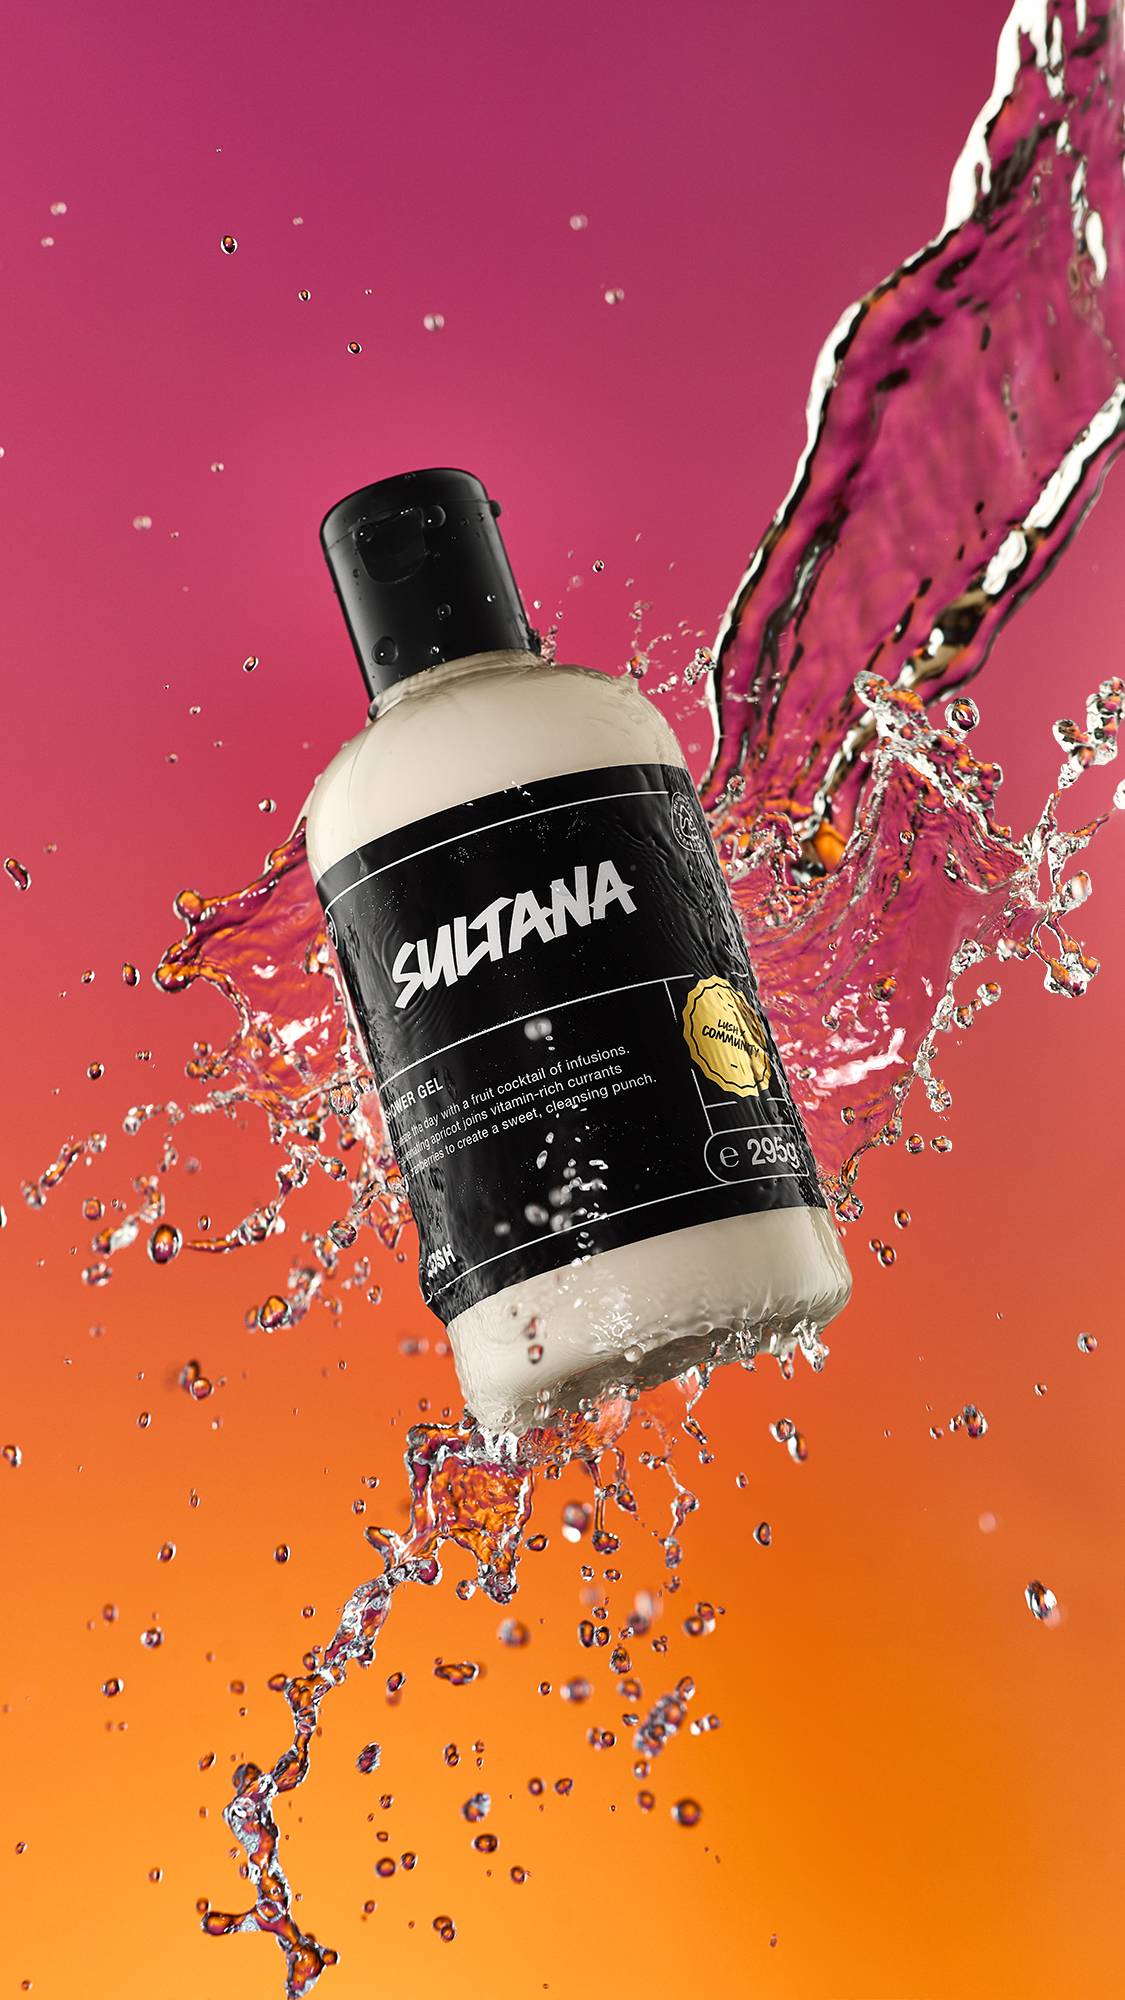 A high-definition action shot of the Sultana shower gel bottle mid-air being splashed by fresh water surrounded by droplets on a blurred pink and orange background.